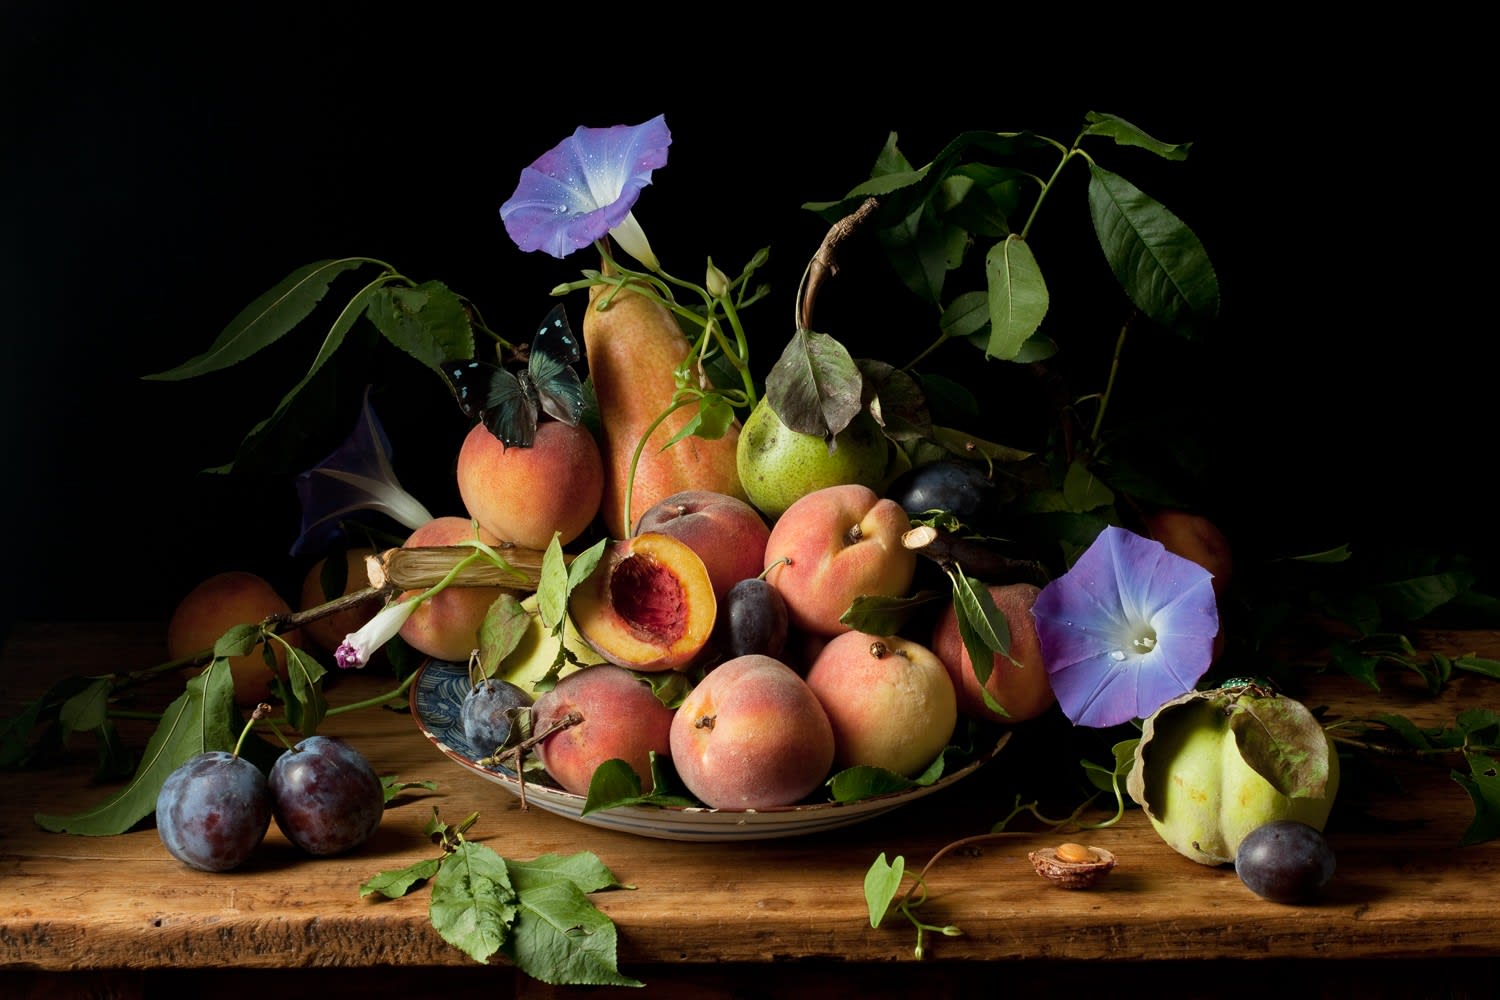 Paulette Tavormina, Peaches and Morning Glories, After G.G., 2010